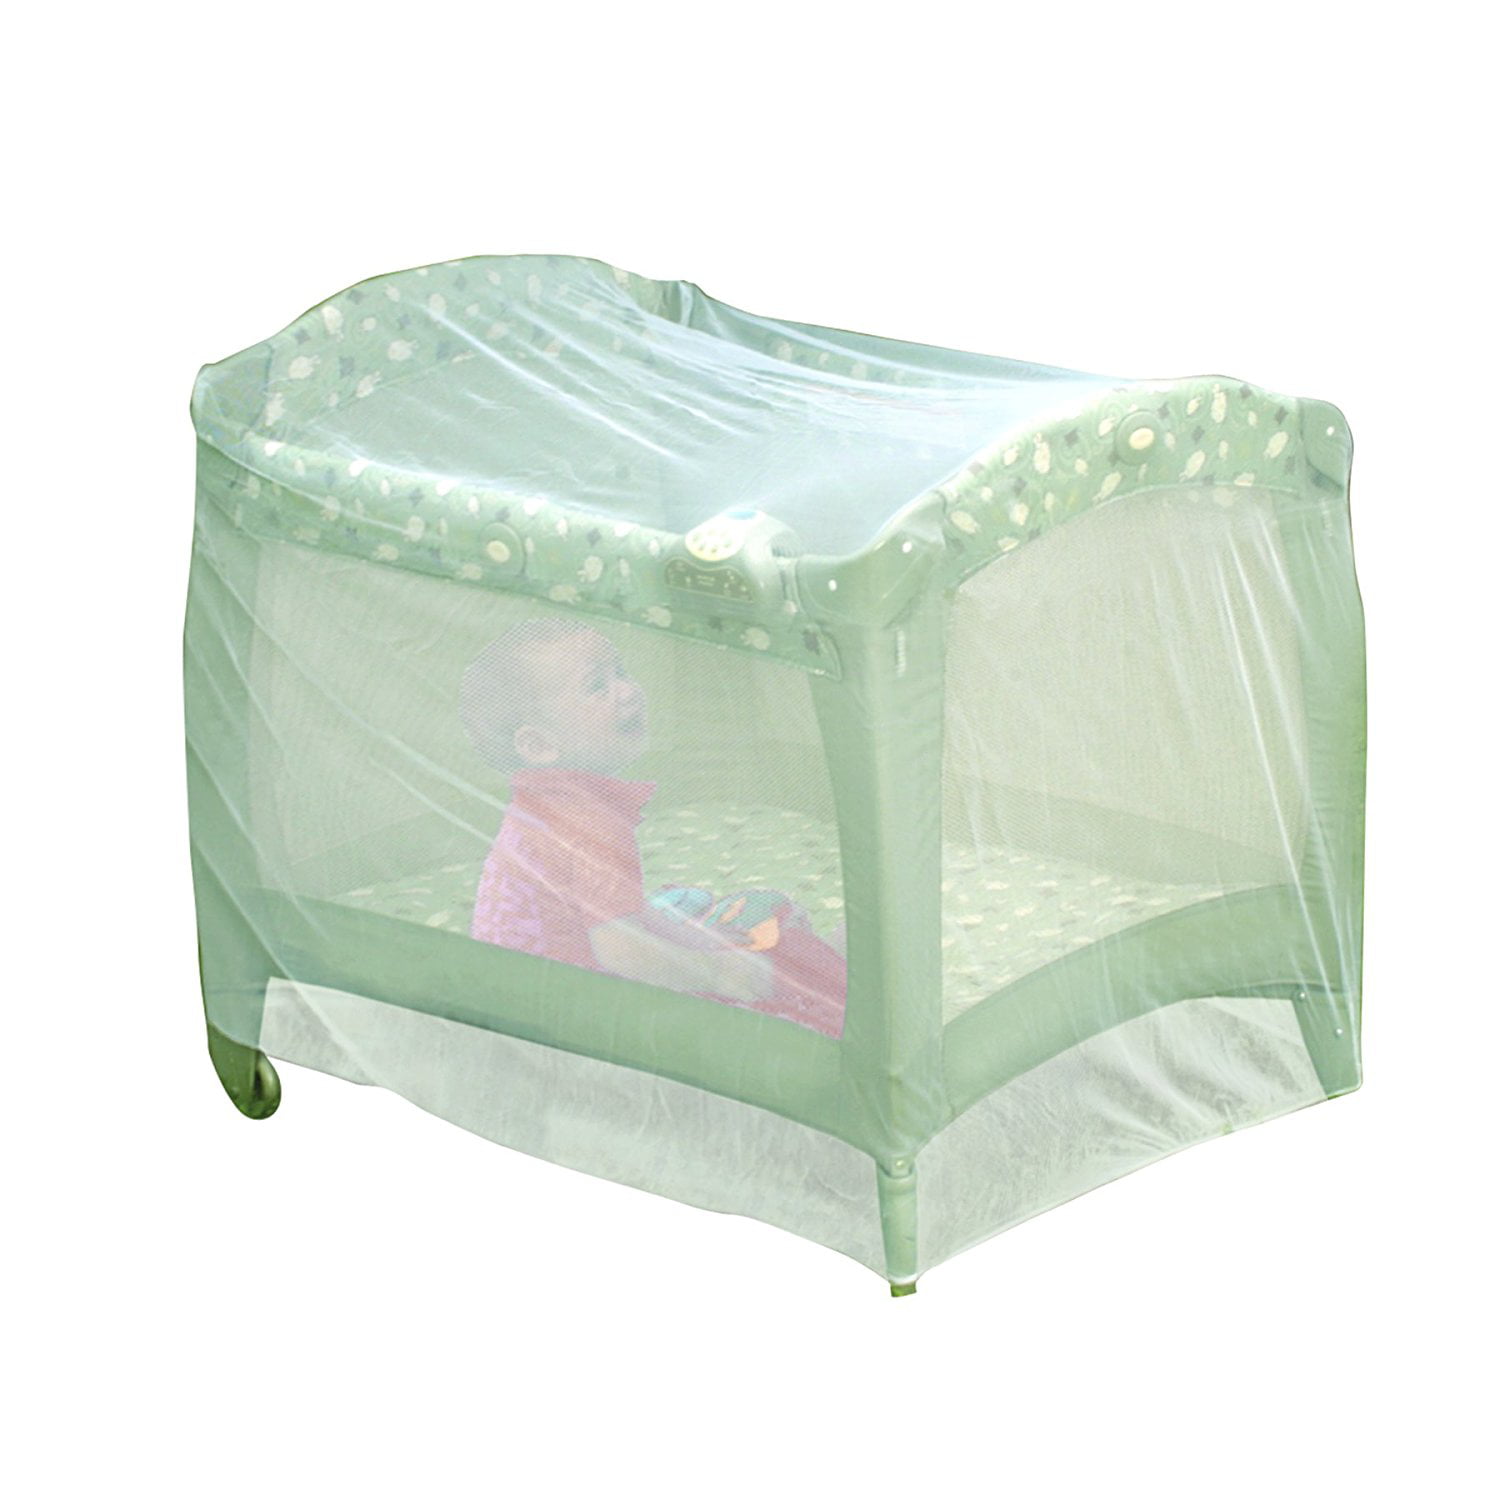 Baby Toddler Playpen Netting Fits Most Graco Jeep Insect Bug net Pack N Play New 